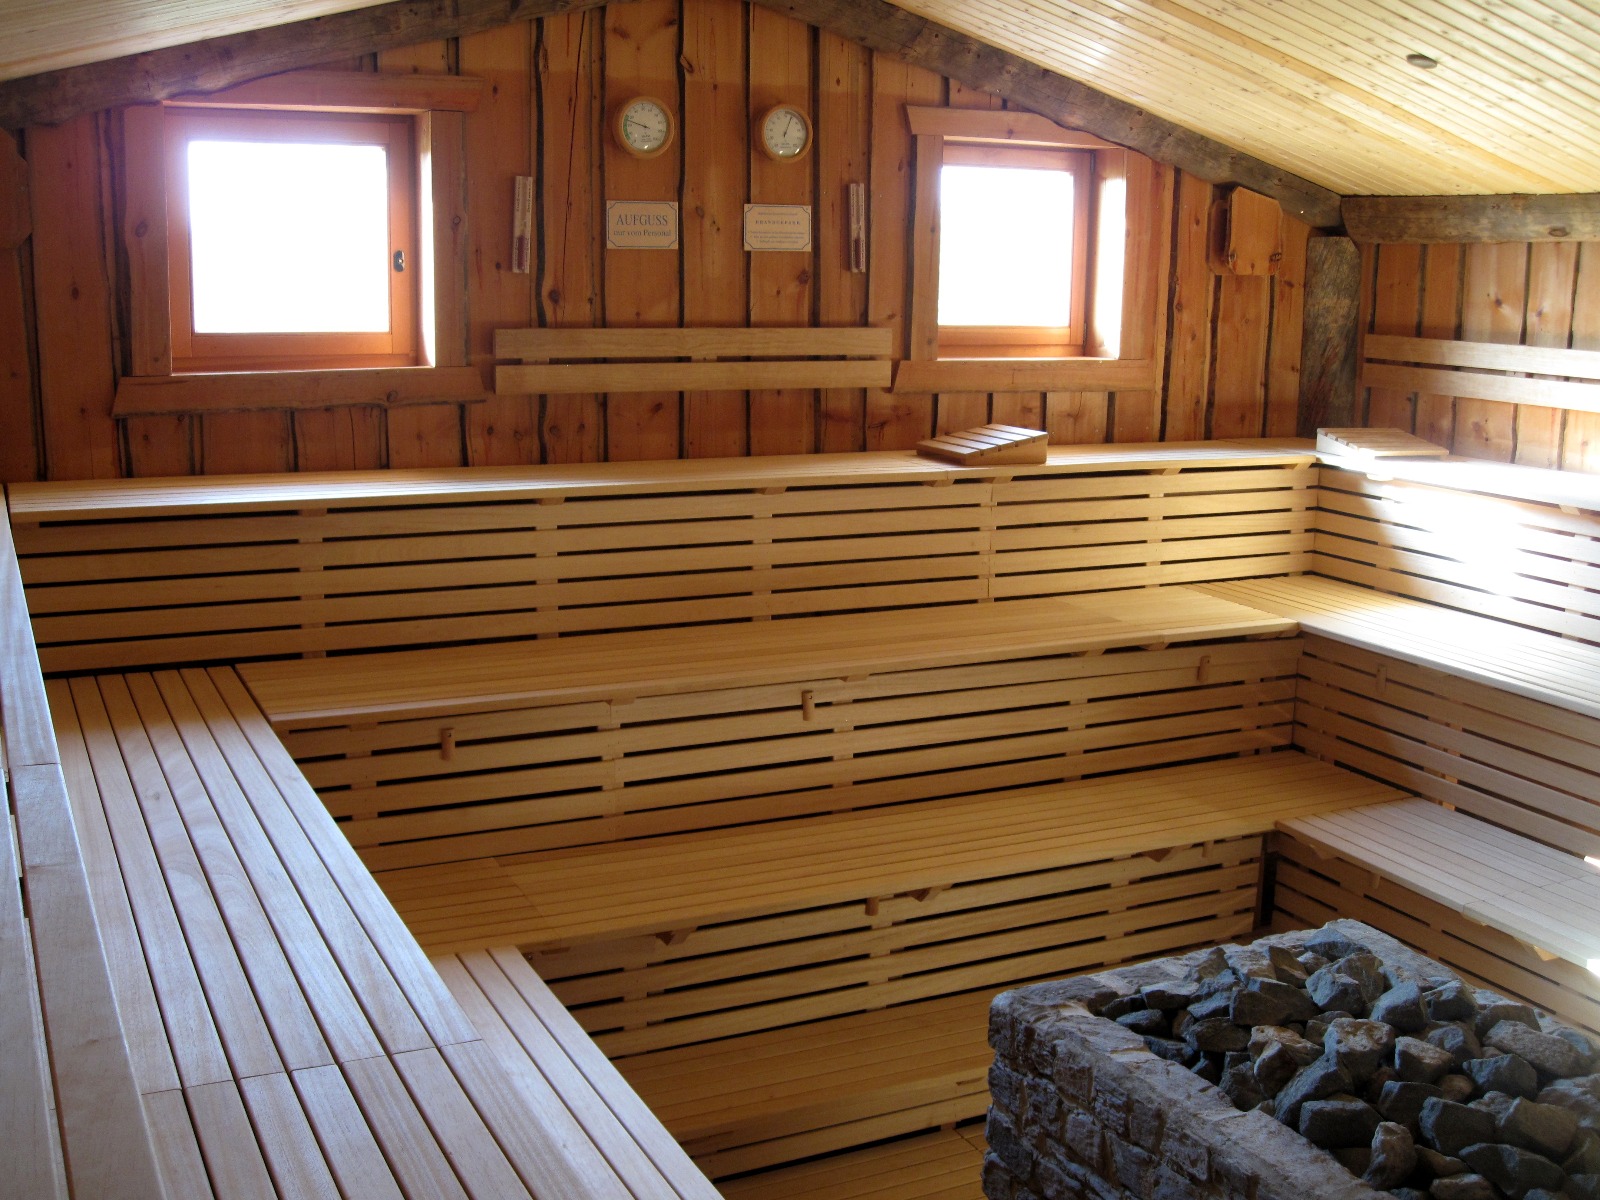 Ventilation is important when buying a sauna